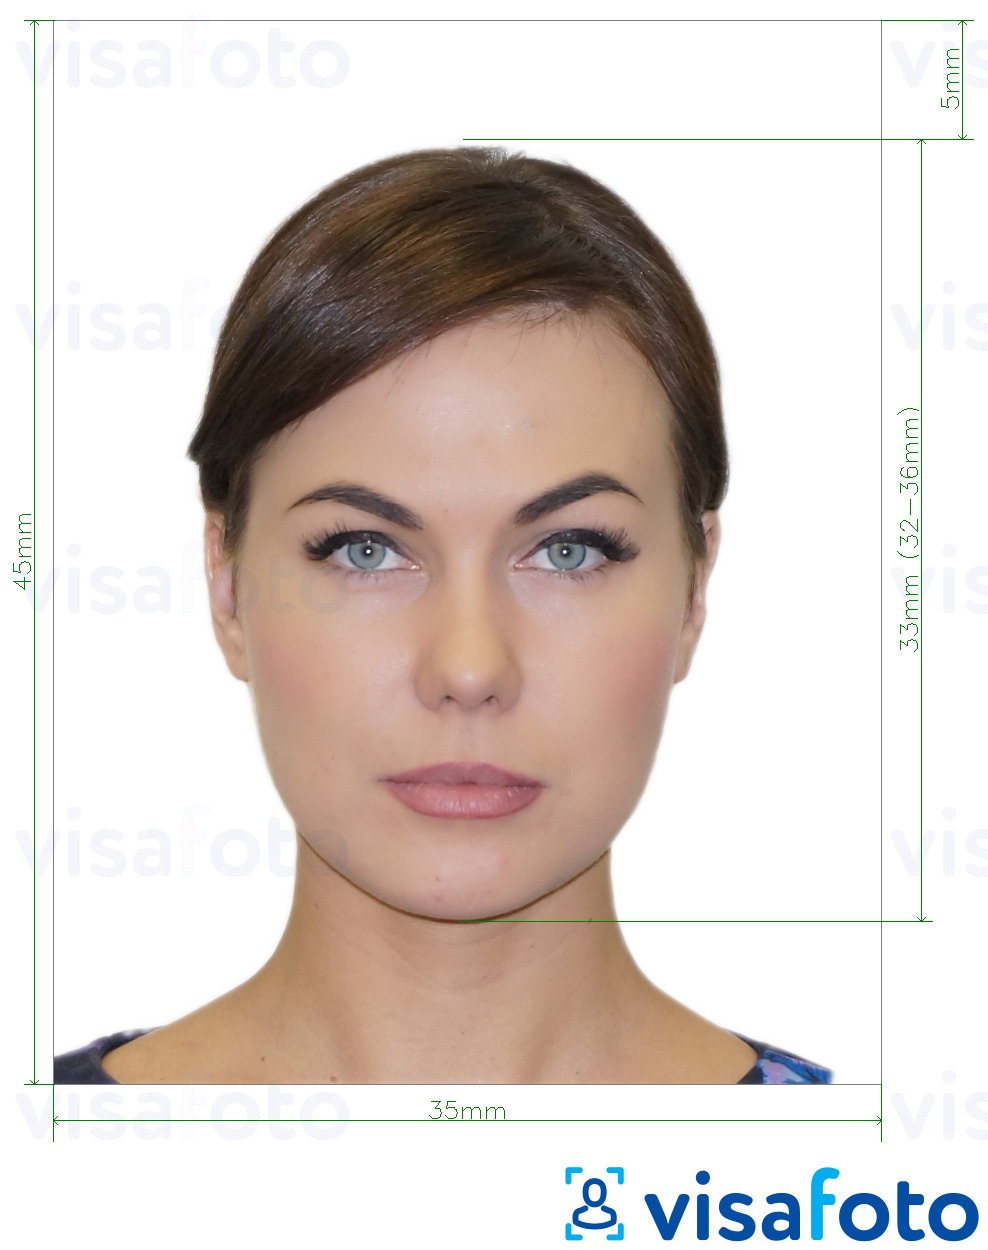 Example of photo for Russia Visa 35x45 mm (3.5x4.5 cm) with exact size specification